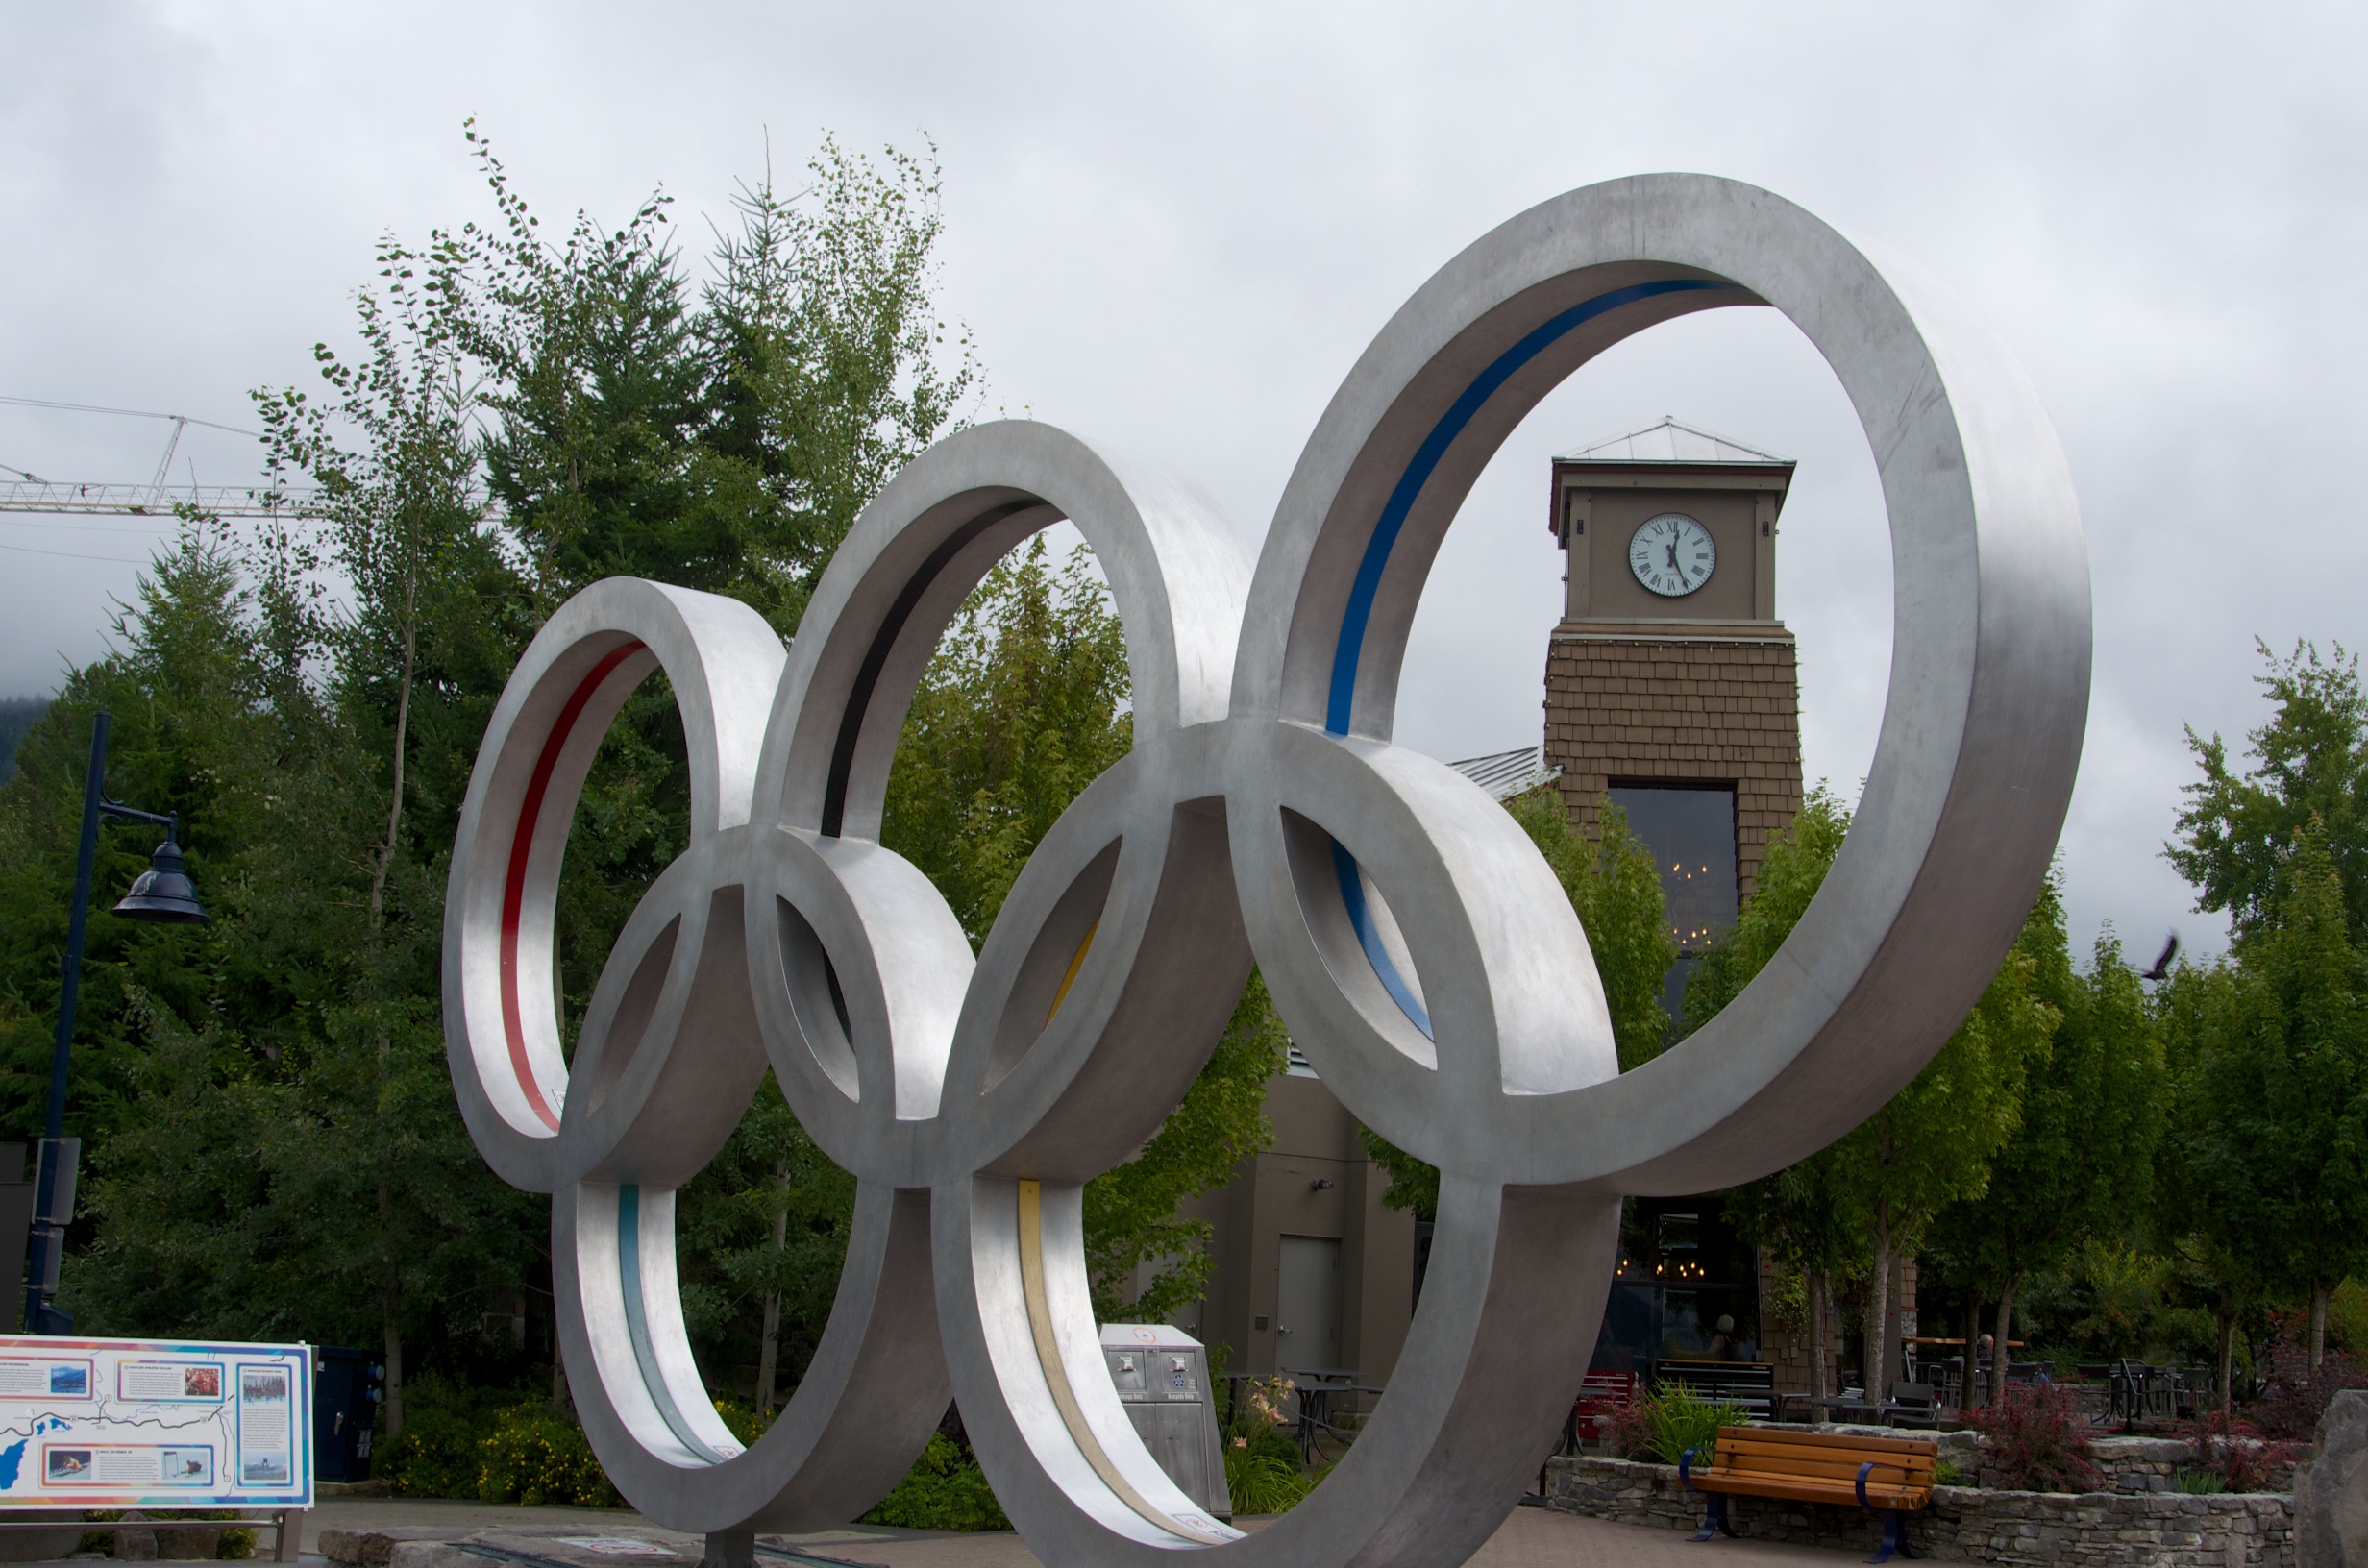  Olympic rings, Whistler, British Columbia, Canada 